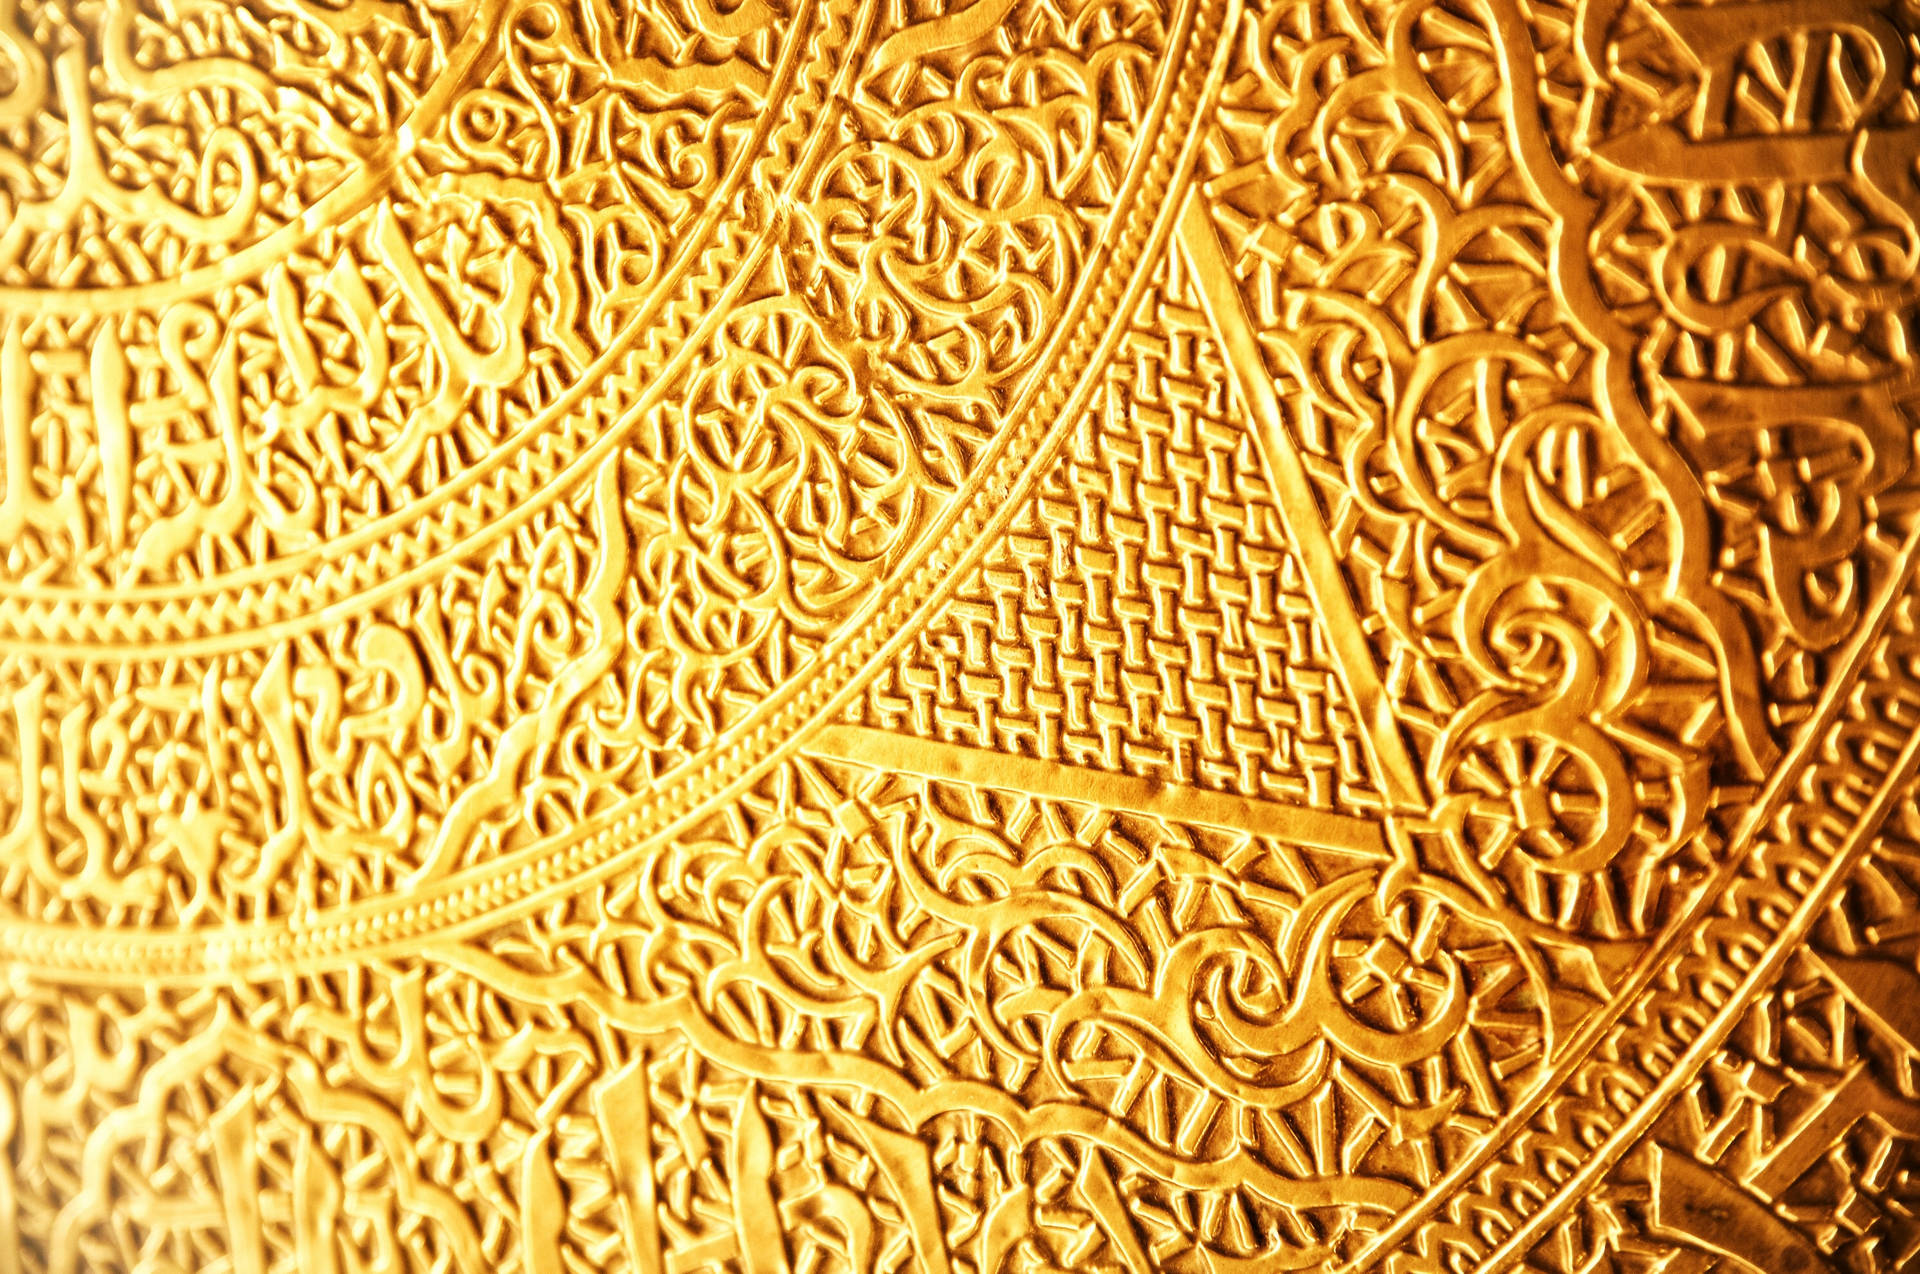 Gold 2979X1976 Wallpaper and Background Image